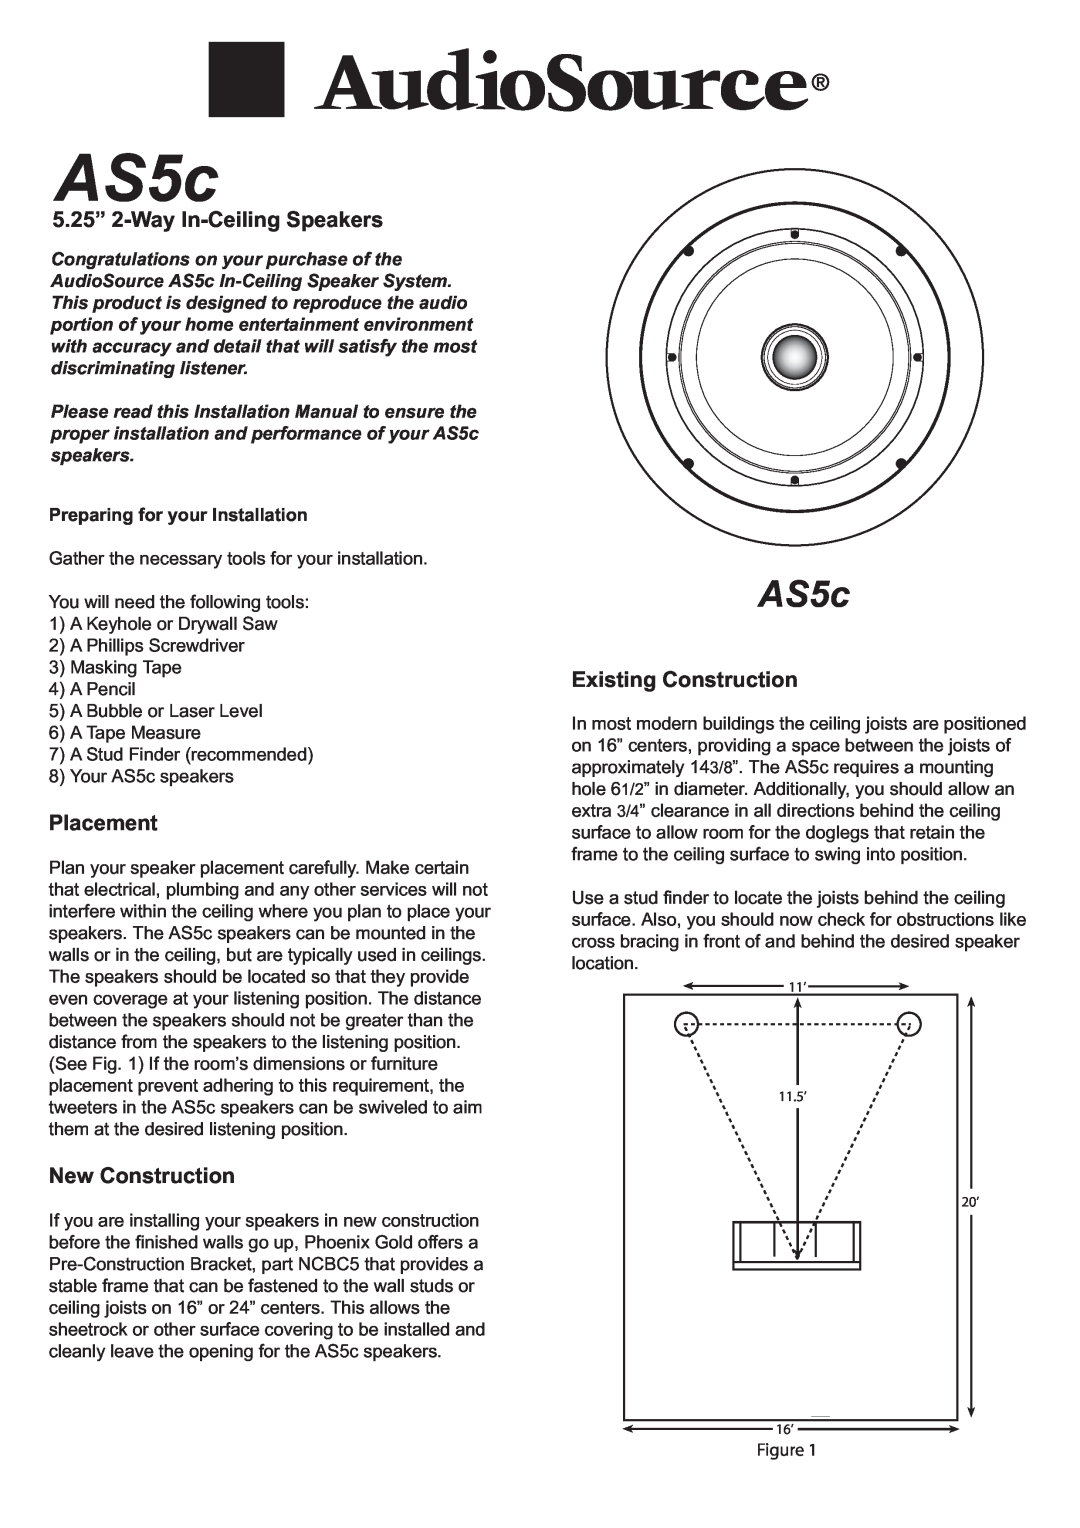 AudioSource AD5C installation instructions Discard Keep, AS5C - ATC5 OR 6-5/8”DIAMETER, CUT OUT 3.VERIFY SIZE WITH RULER 